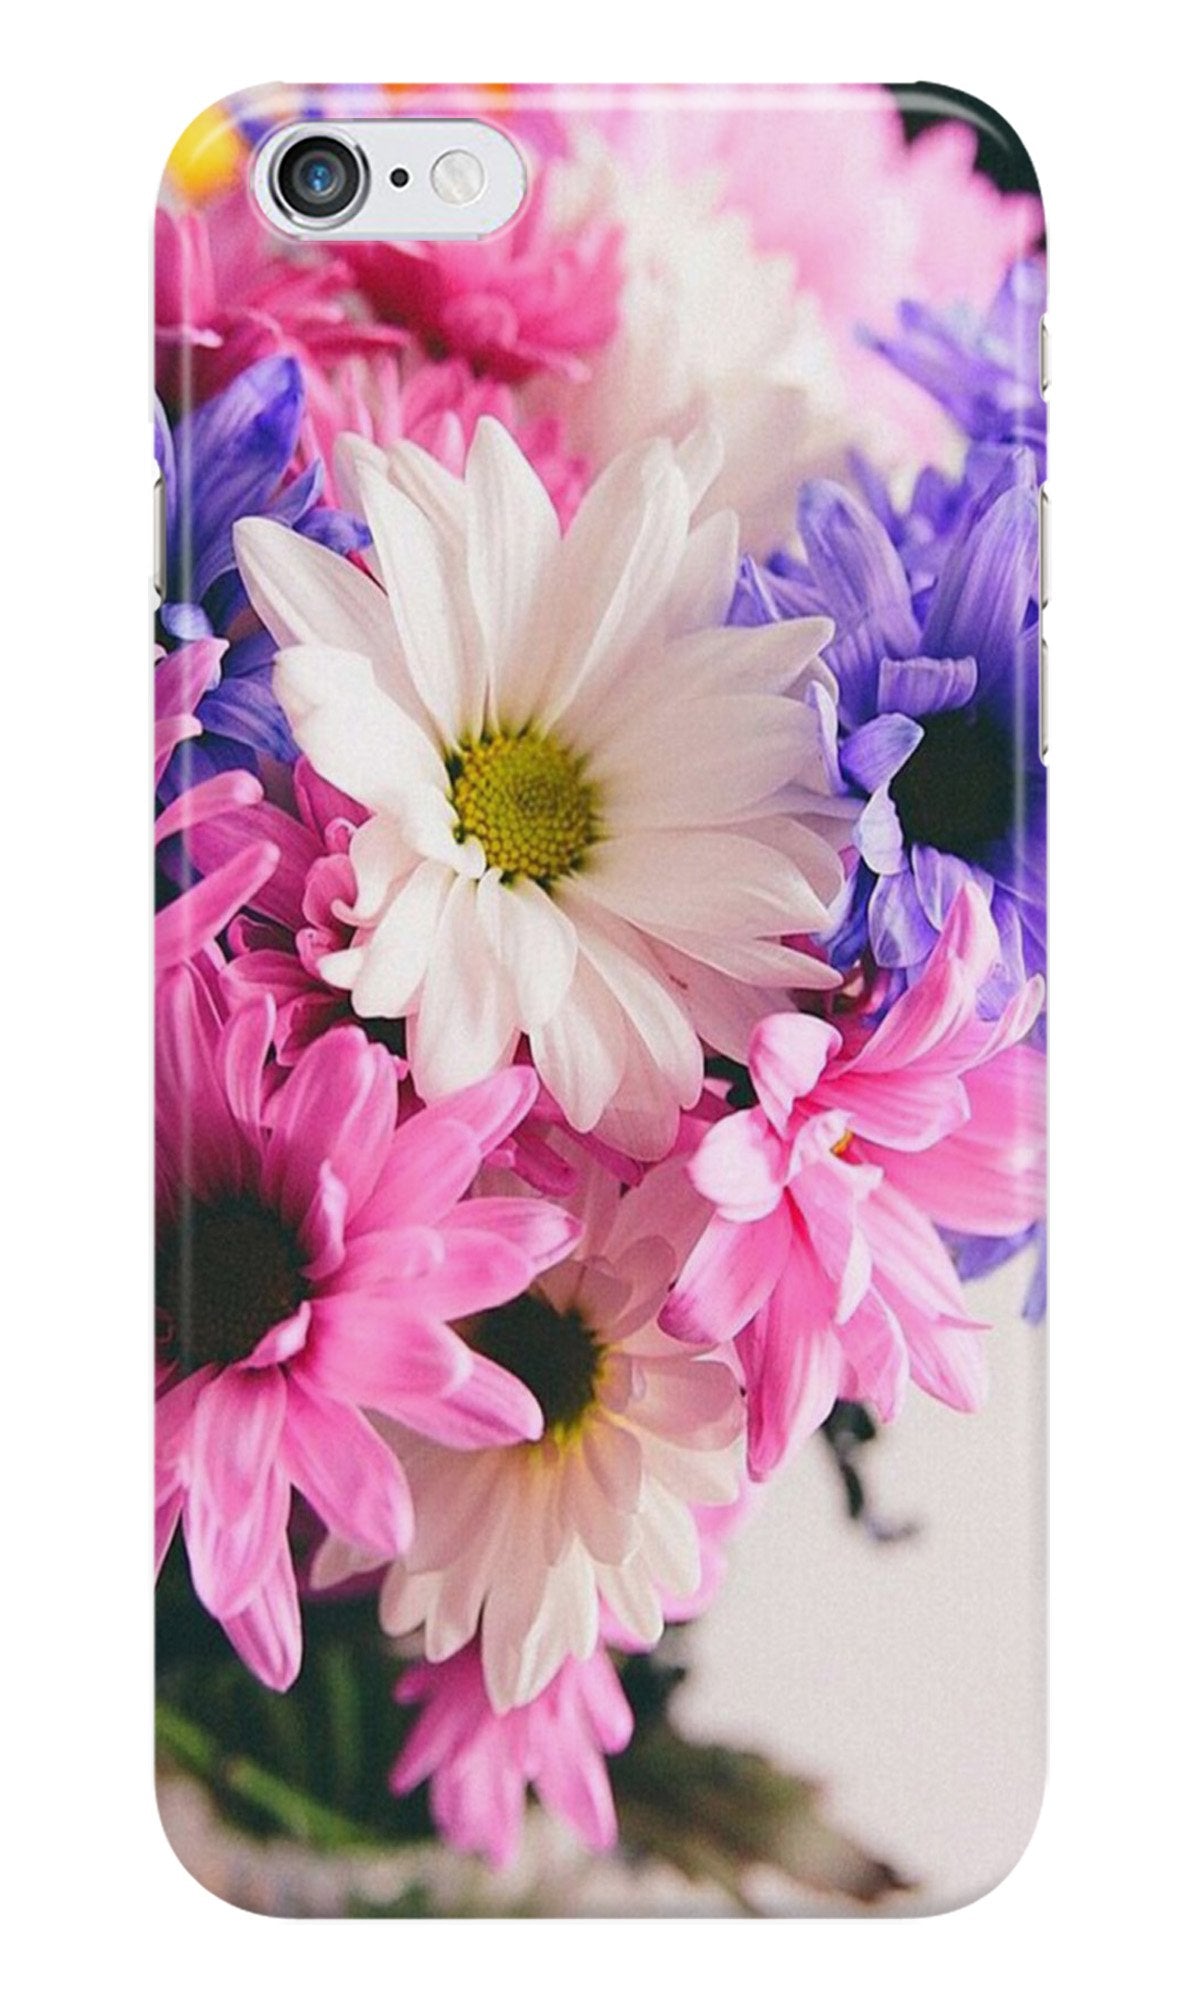 Coloful Daisy Case for iPhone 6/ 6s